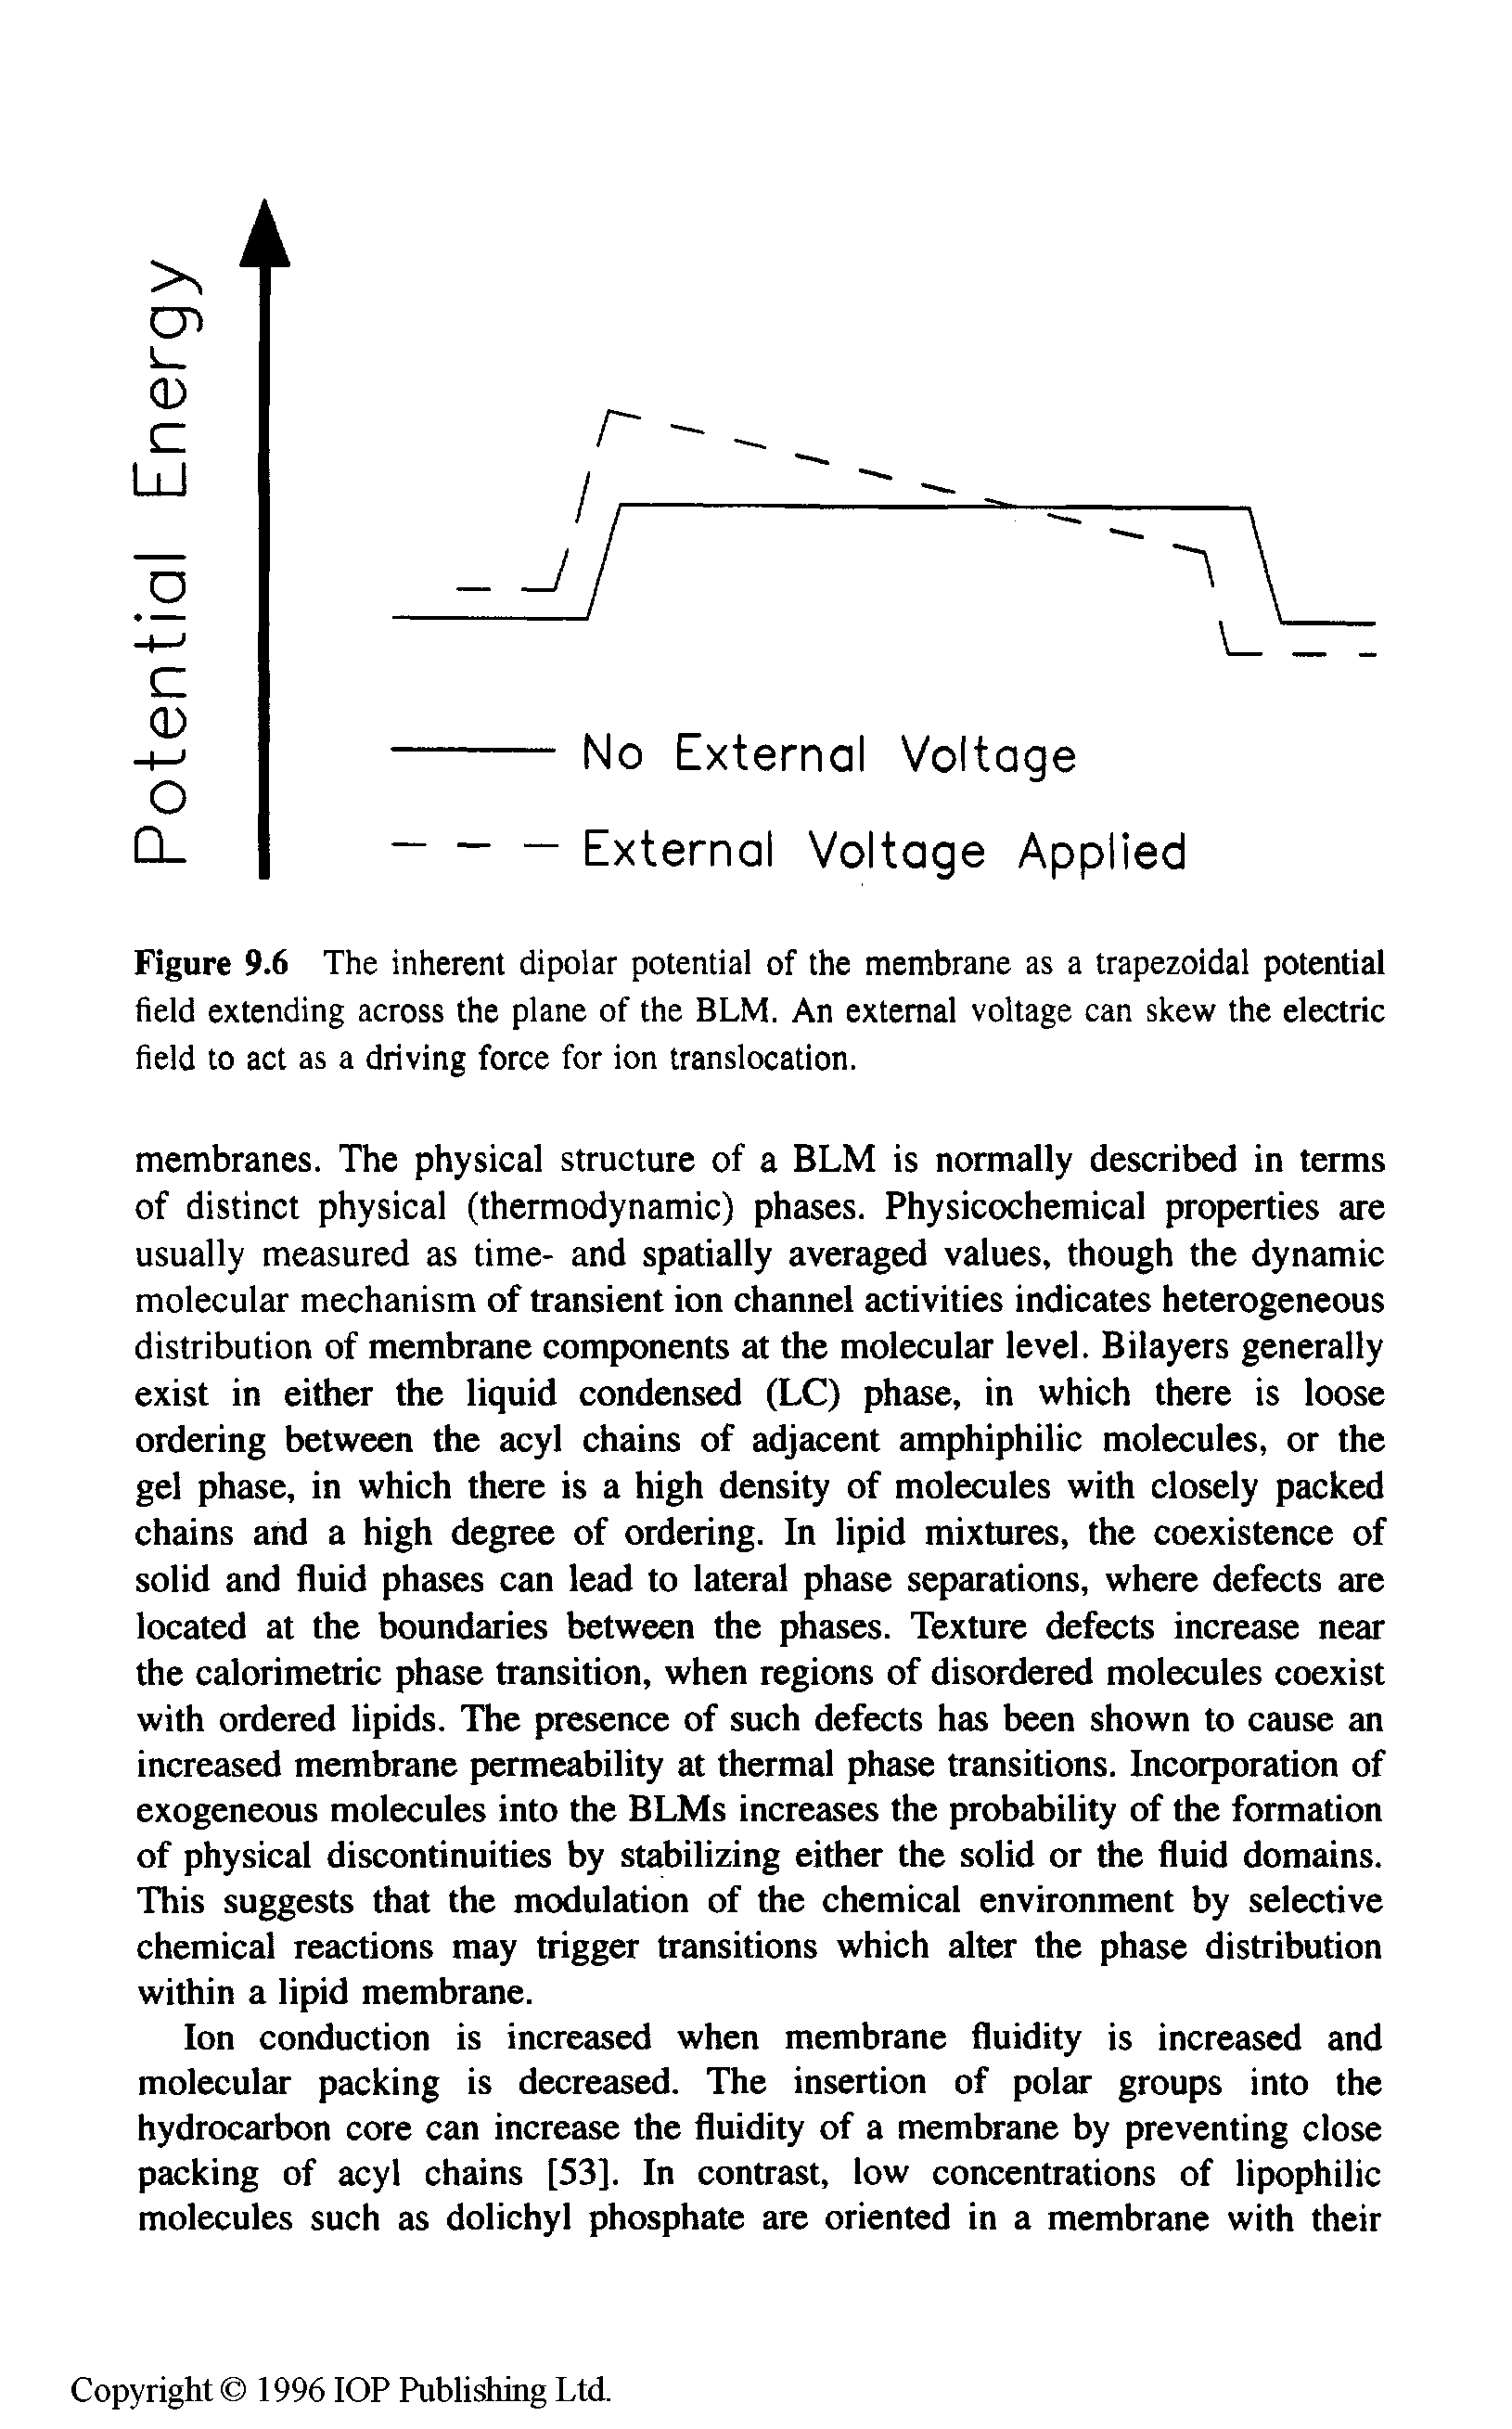 Figure 9.6 The inherent dipolar potential of the membrane as a trapezoidal potential field extending across the plane of the BLM. An external voltage can skew the electric field to act as a driving force for ion translocation.